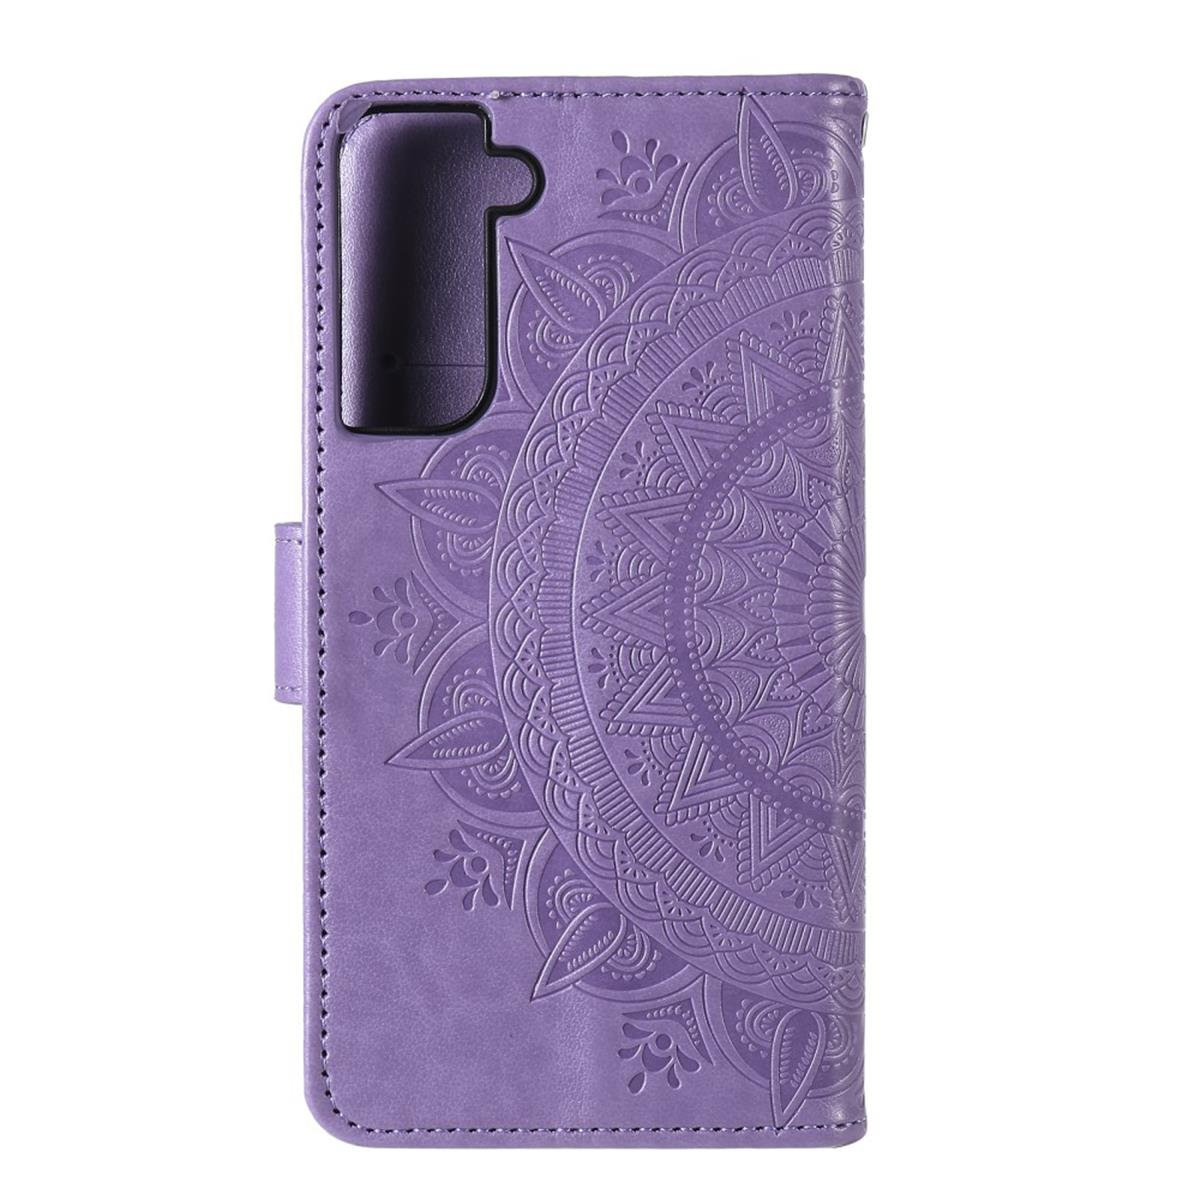 COVERKINGZ Klapphülle mit S21, Samsung, Muster, Mandala Galaxy Lila Bookcover